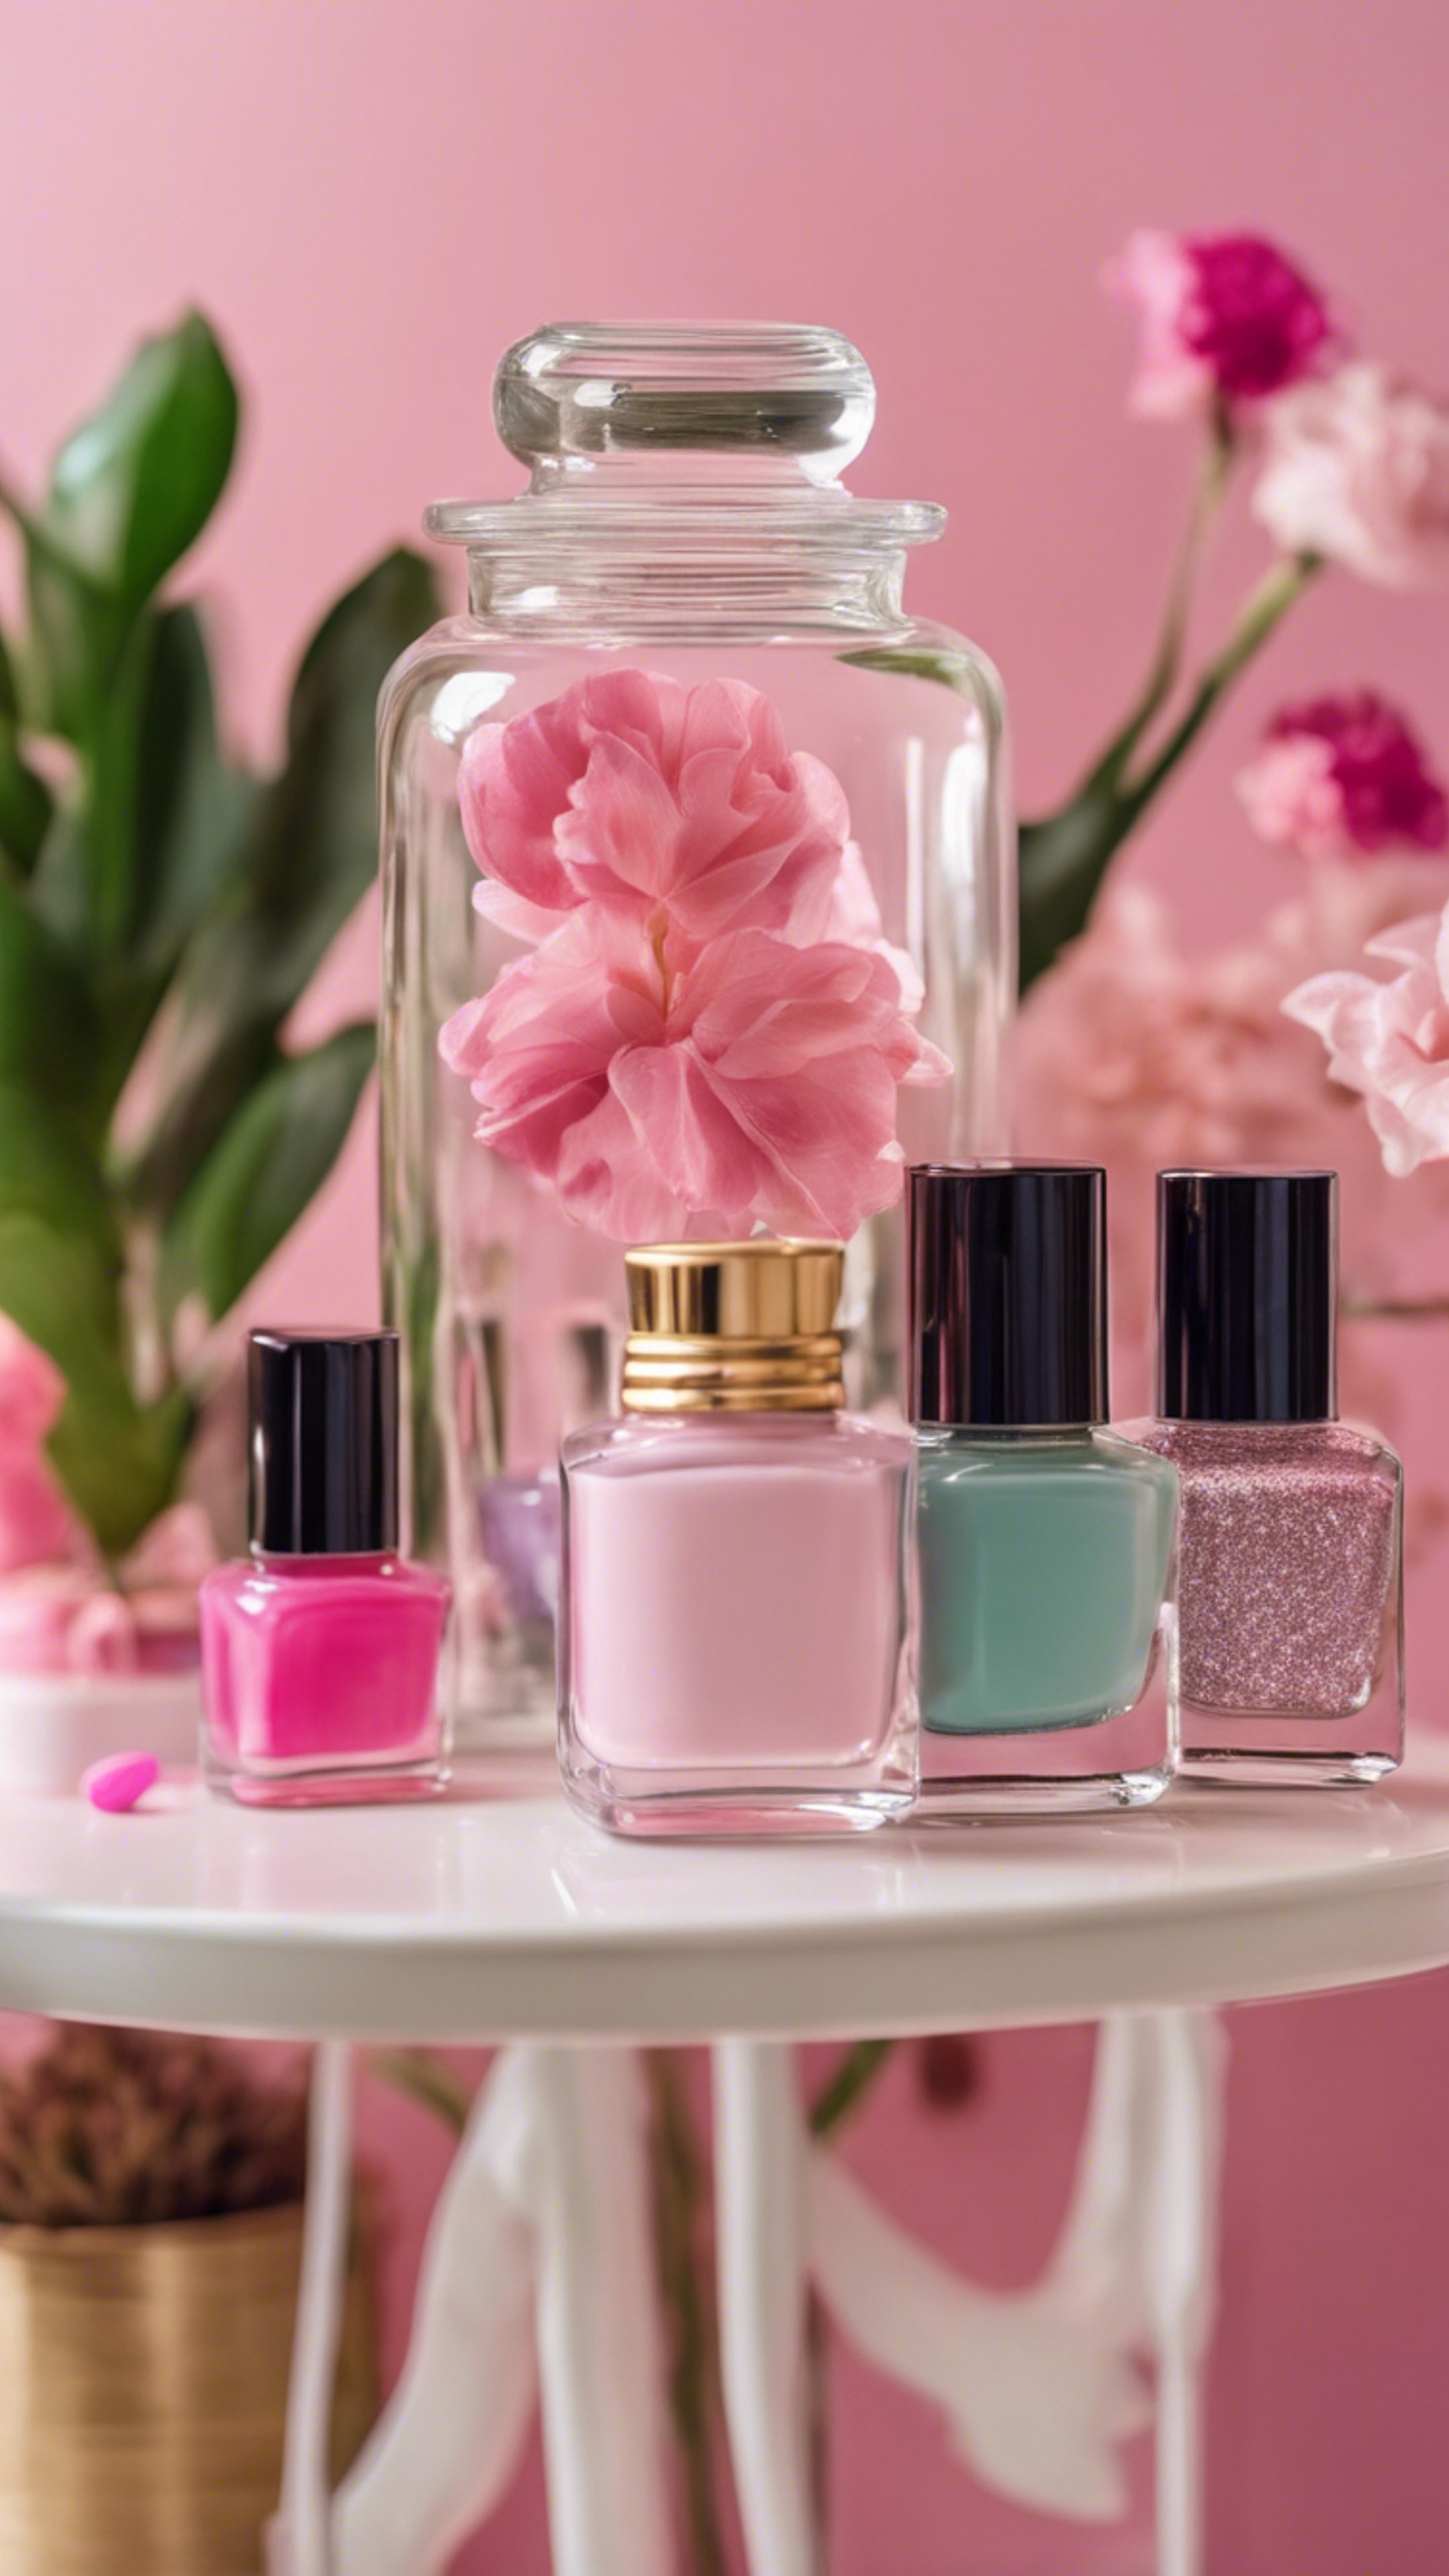 A glass jar full of colorful girly nail polishes on a pink dressing table with a chic plant in the background. Hình nền[6e6d72fe0d8e4450902a]